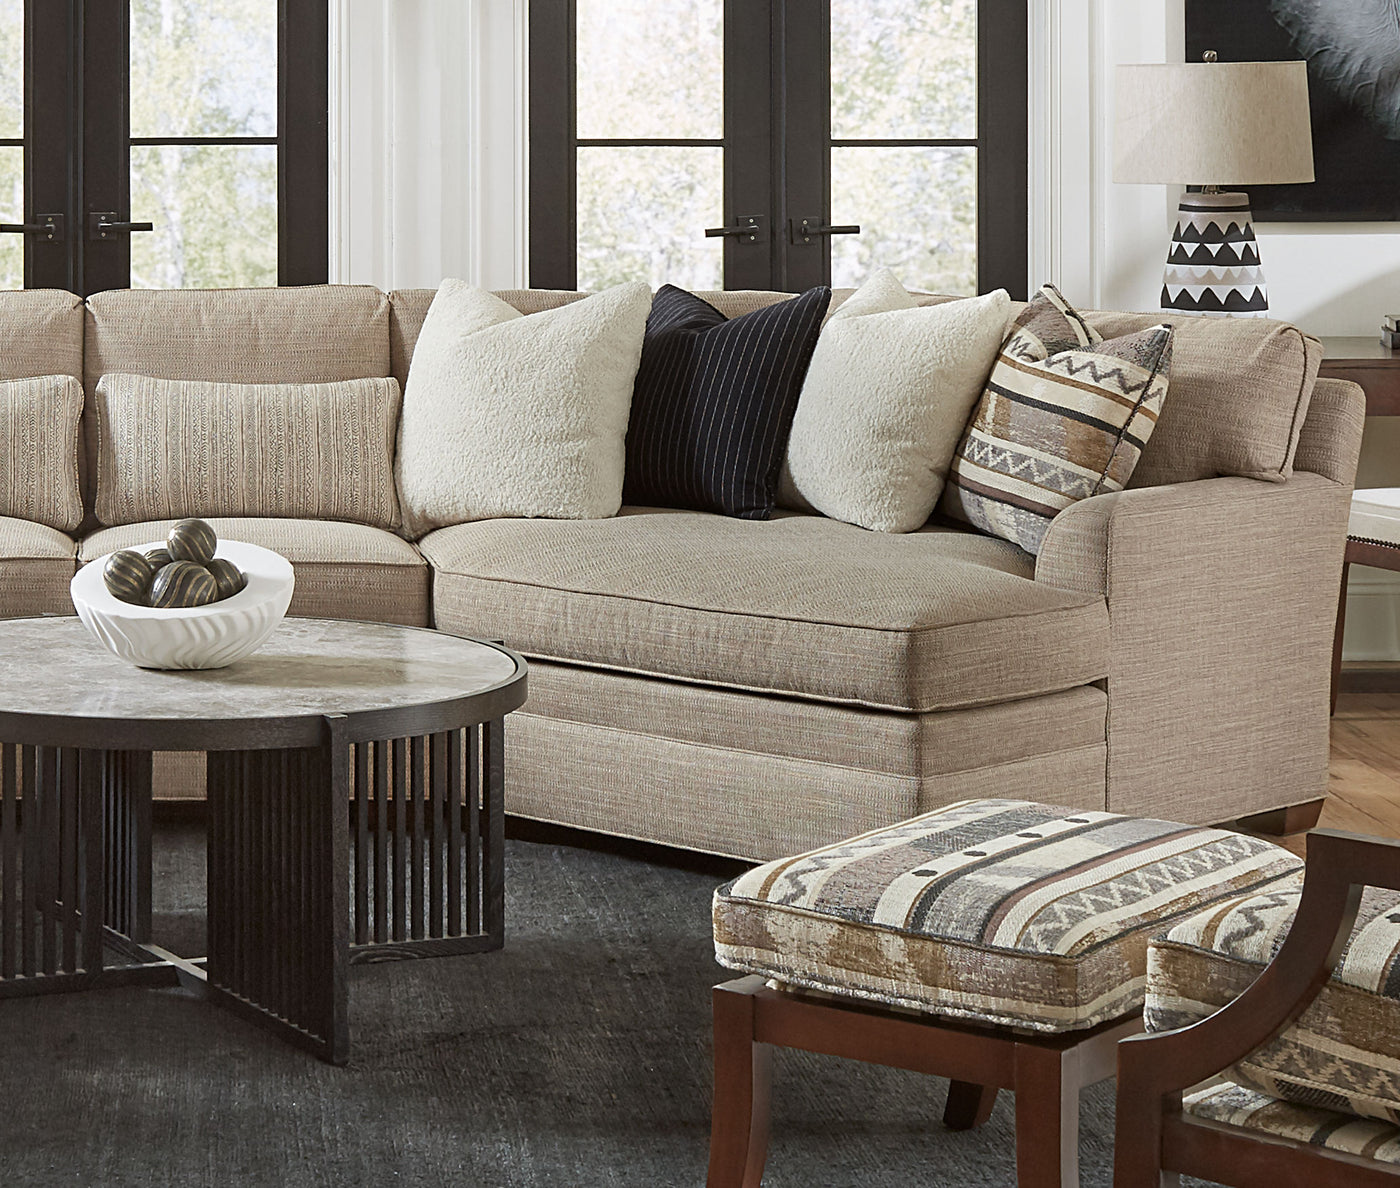 A 7000 Series sectional with light tan colored fabric, the sectional has many white, black, or tan and white decorative pillows, a Park Slope Round Cocktail Table sits in front of the table 